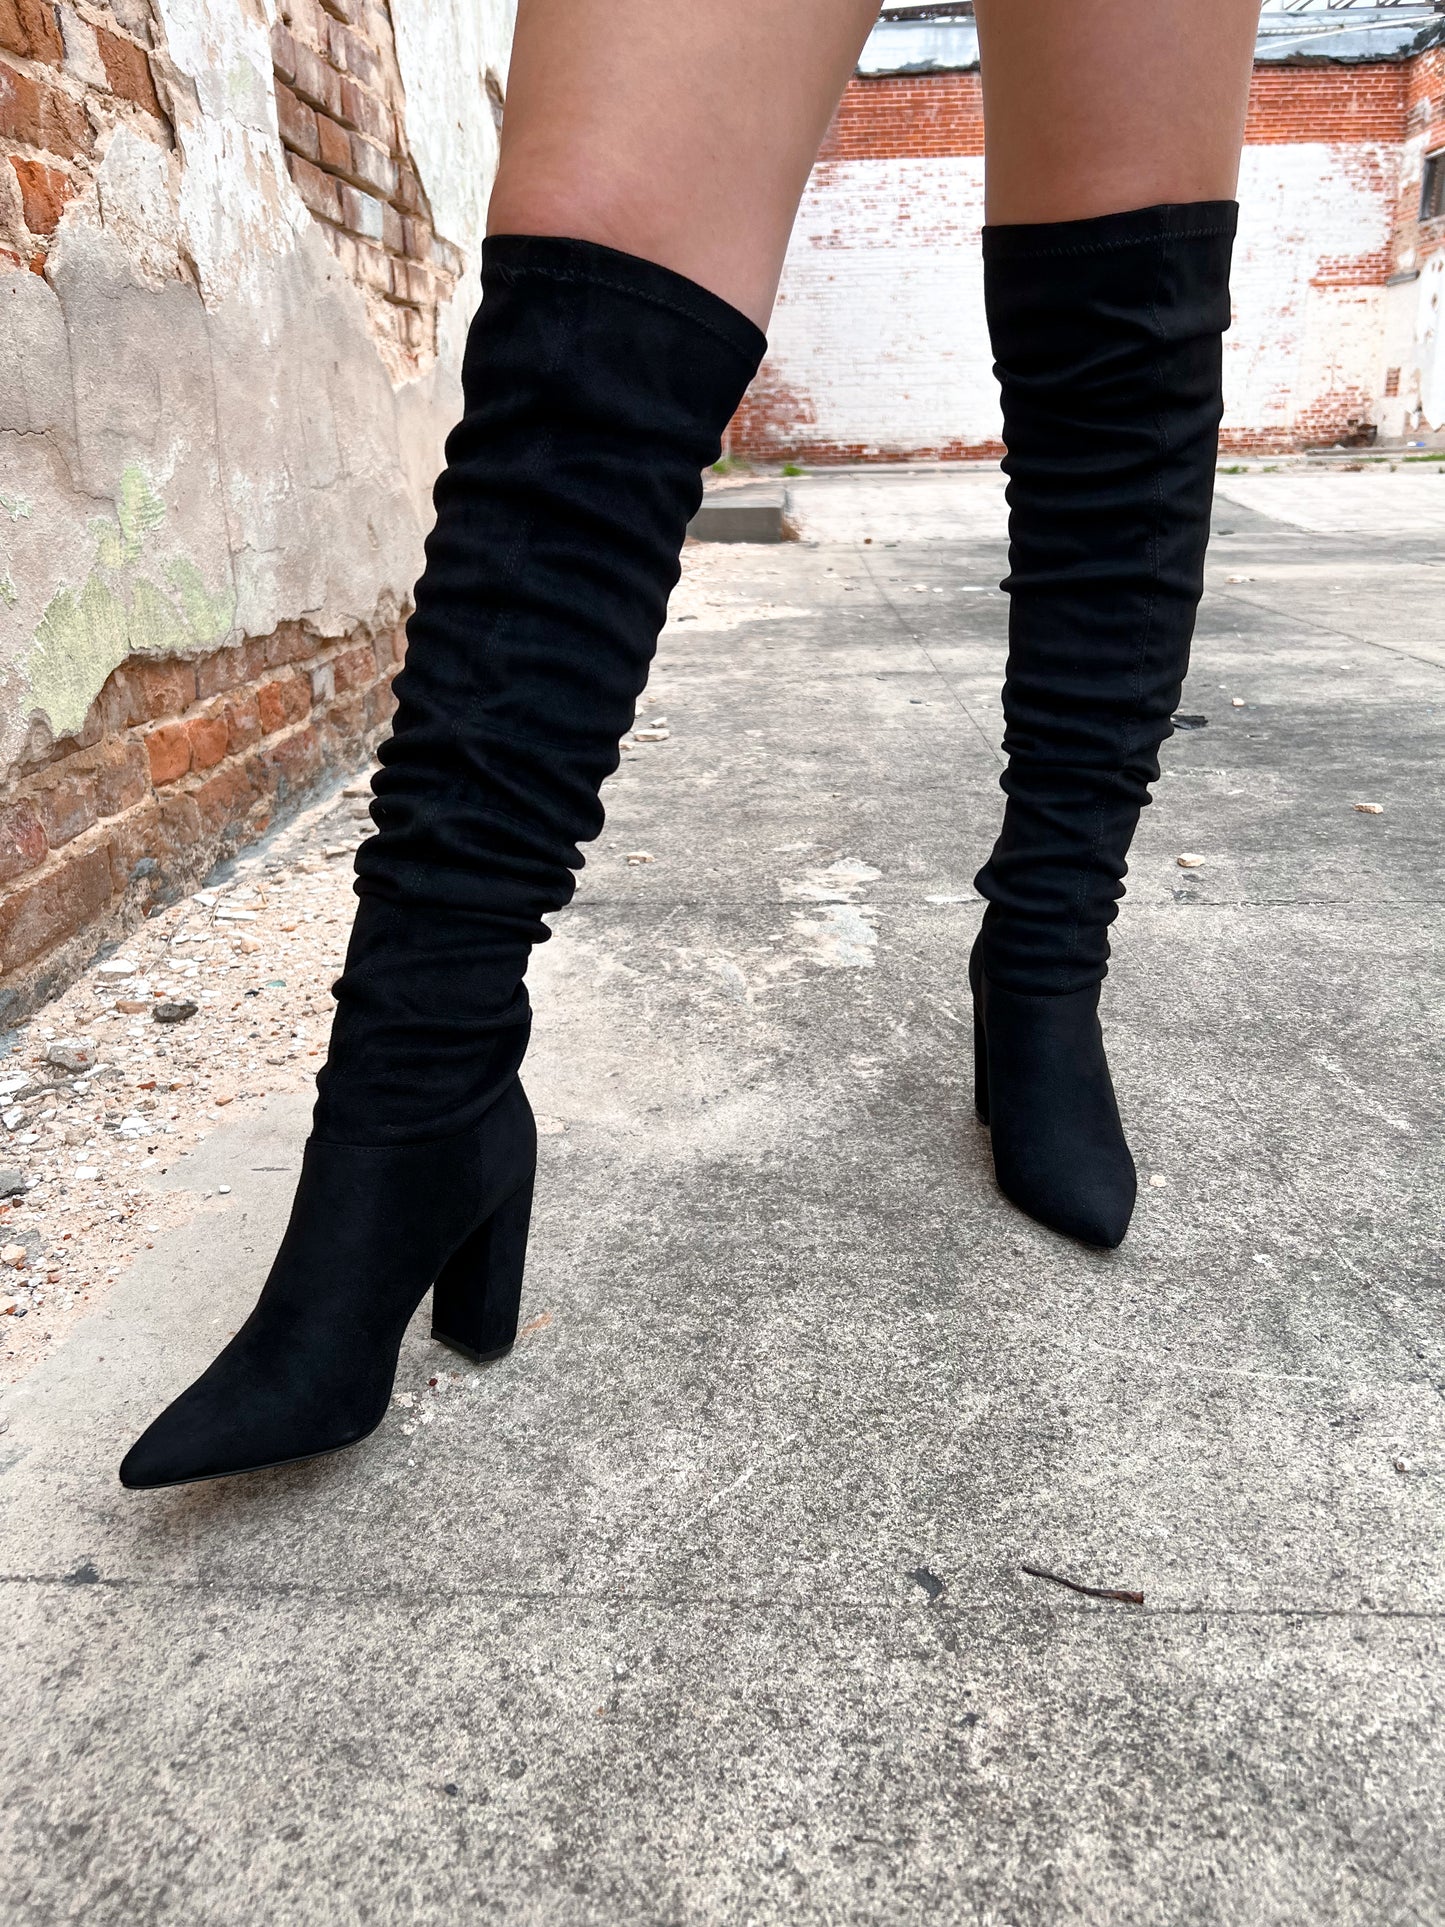 Over the Knee Black Stretch Faux Suede Boots-Boots-Qupid-09/12/23-The Twisted Chandelier